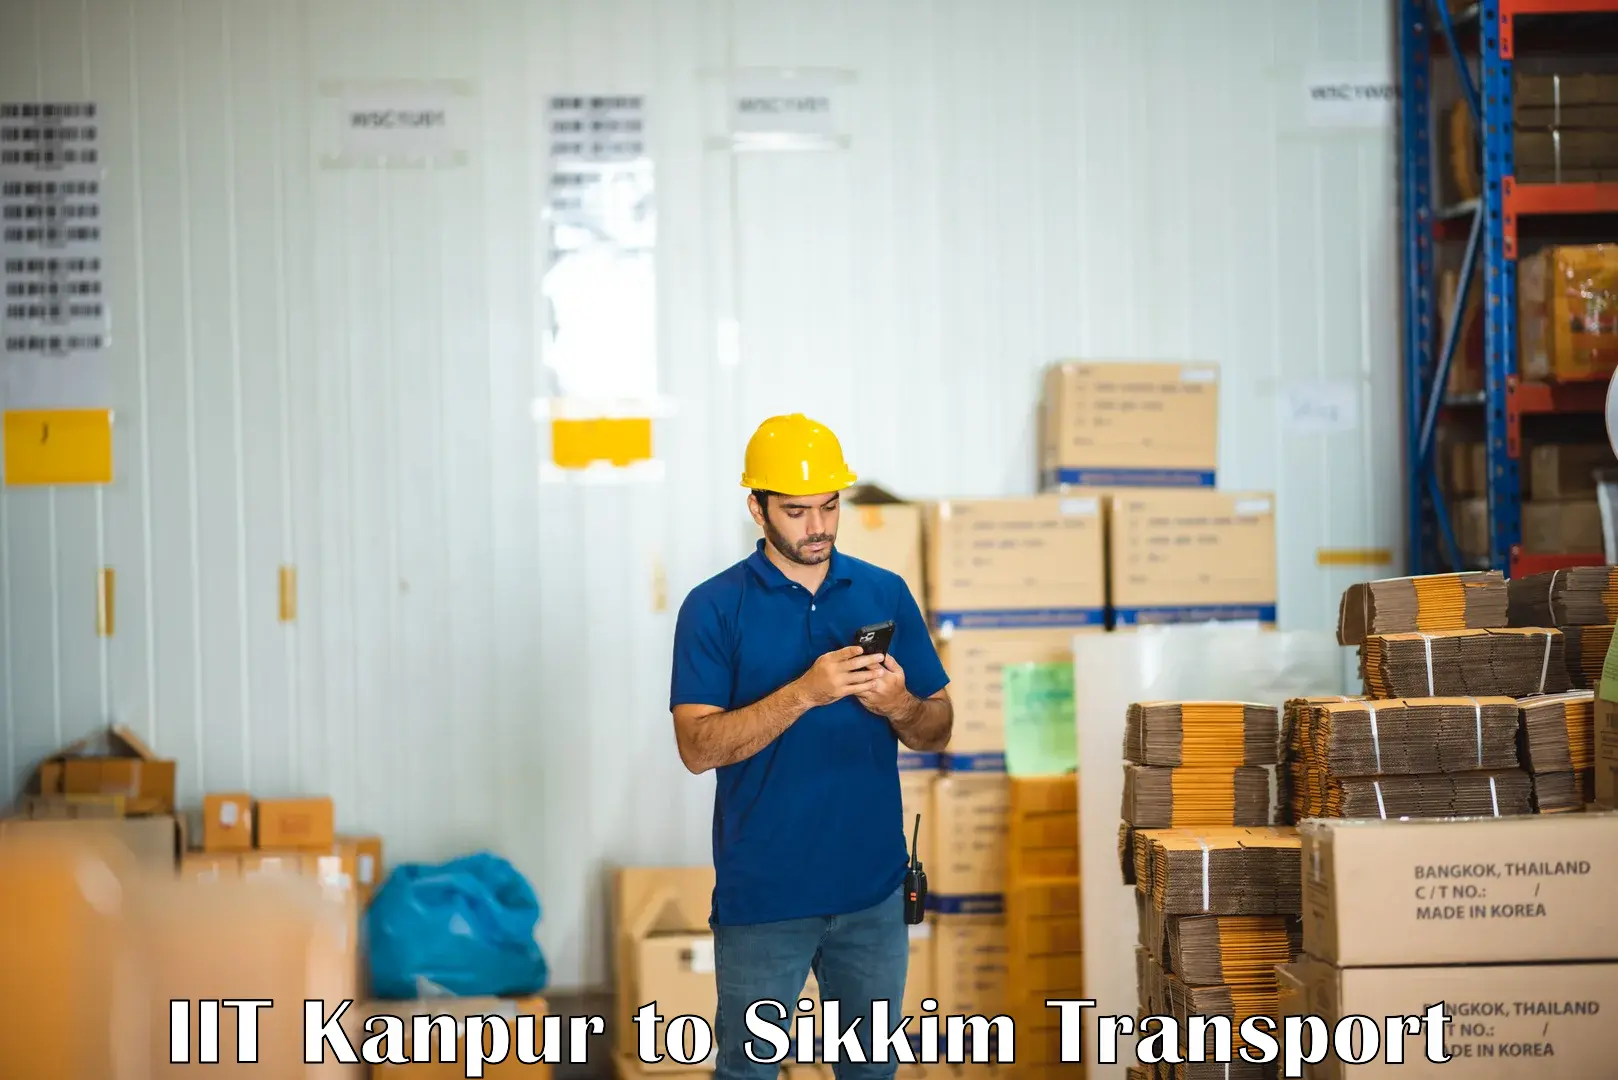 Daily transport service IIT Kanpur to South Sikkim